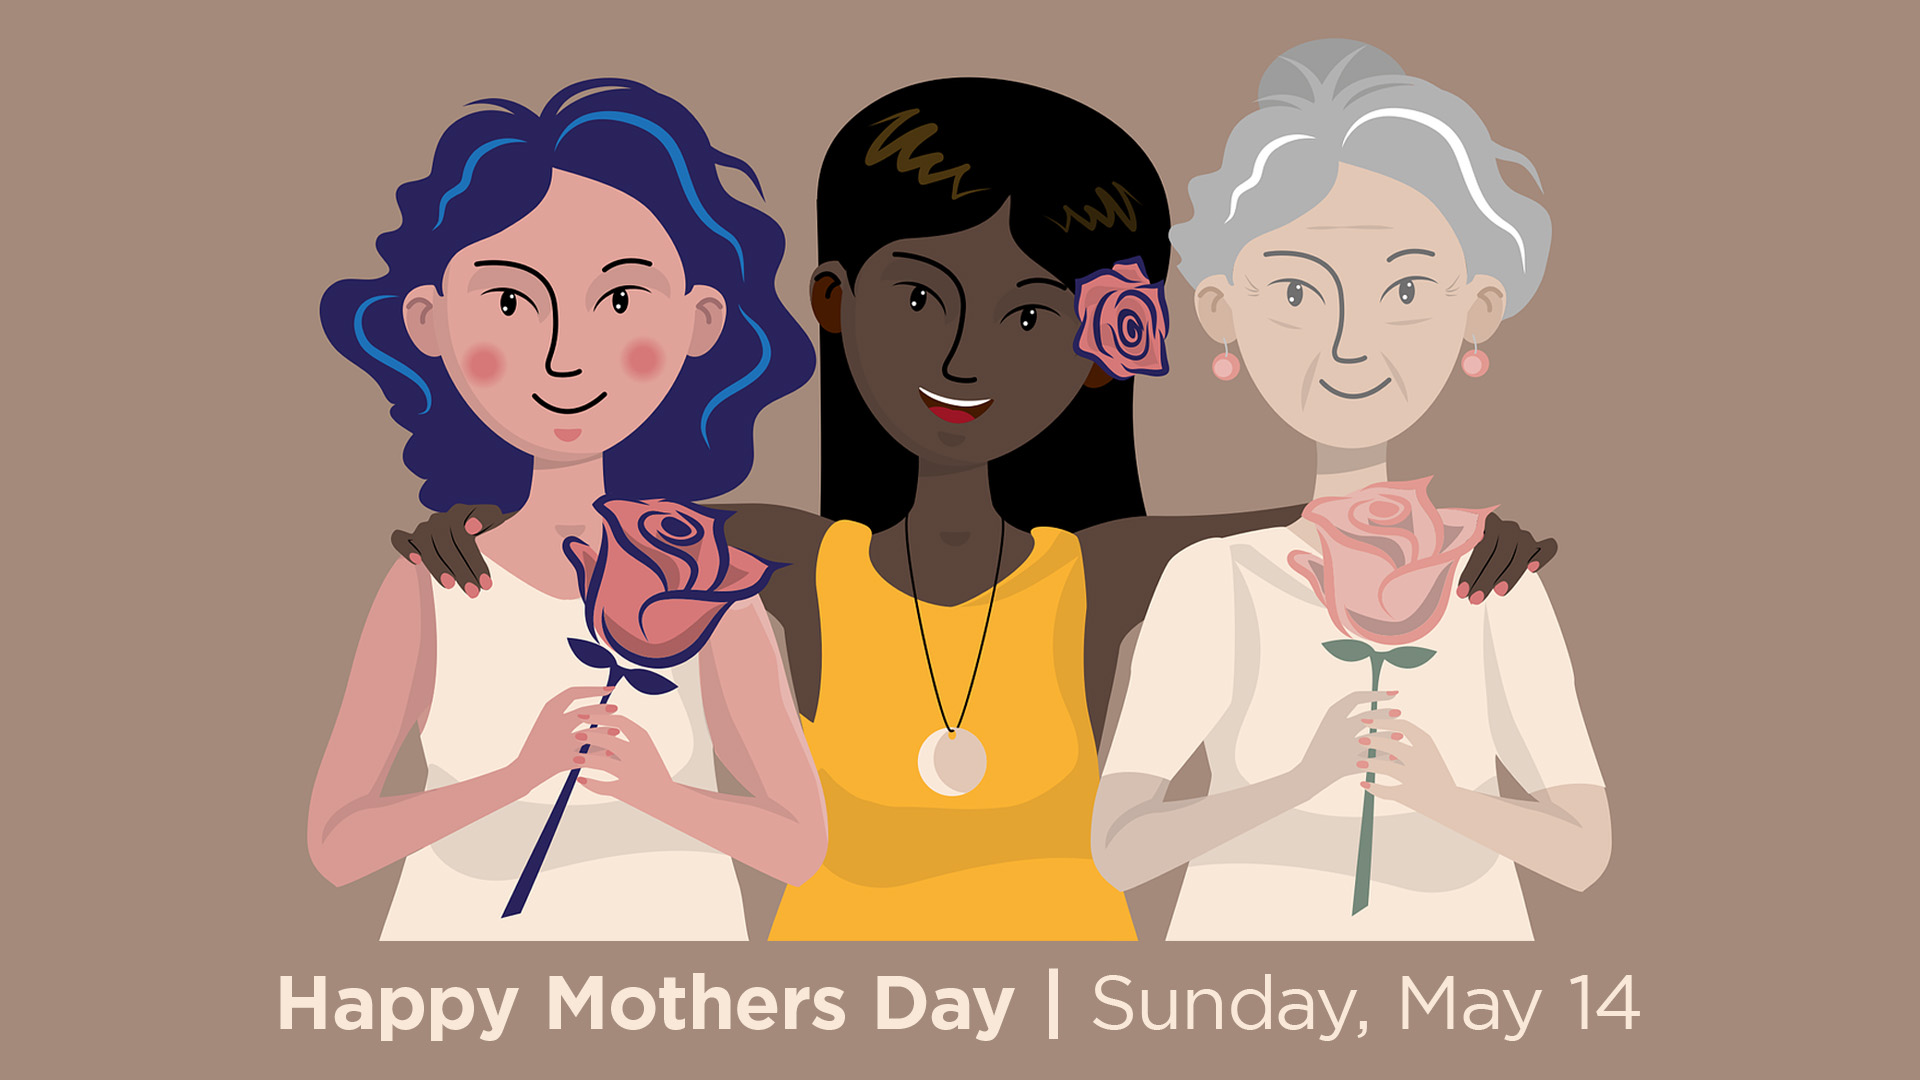 a middle aged woman stands on the left of the graphic holding a rose. A younger aged woman stands in the middle with a rose in her hair and her arms wrapped around the other 2 ladies. A older lady stands on the right holding a rose in her hands. underneath them it reads Happy Mothers Day | Sunday May, 14